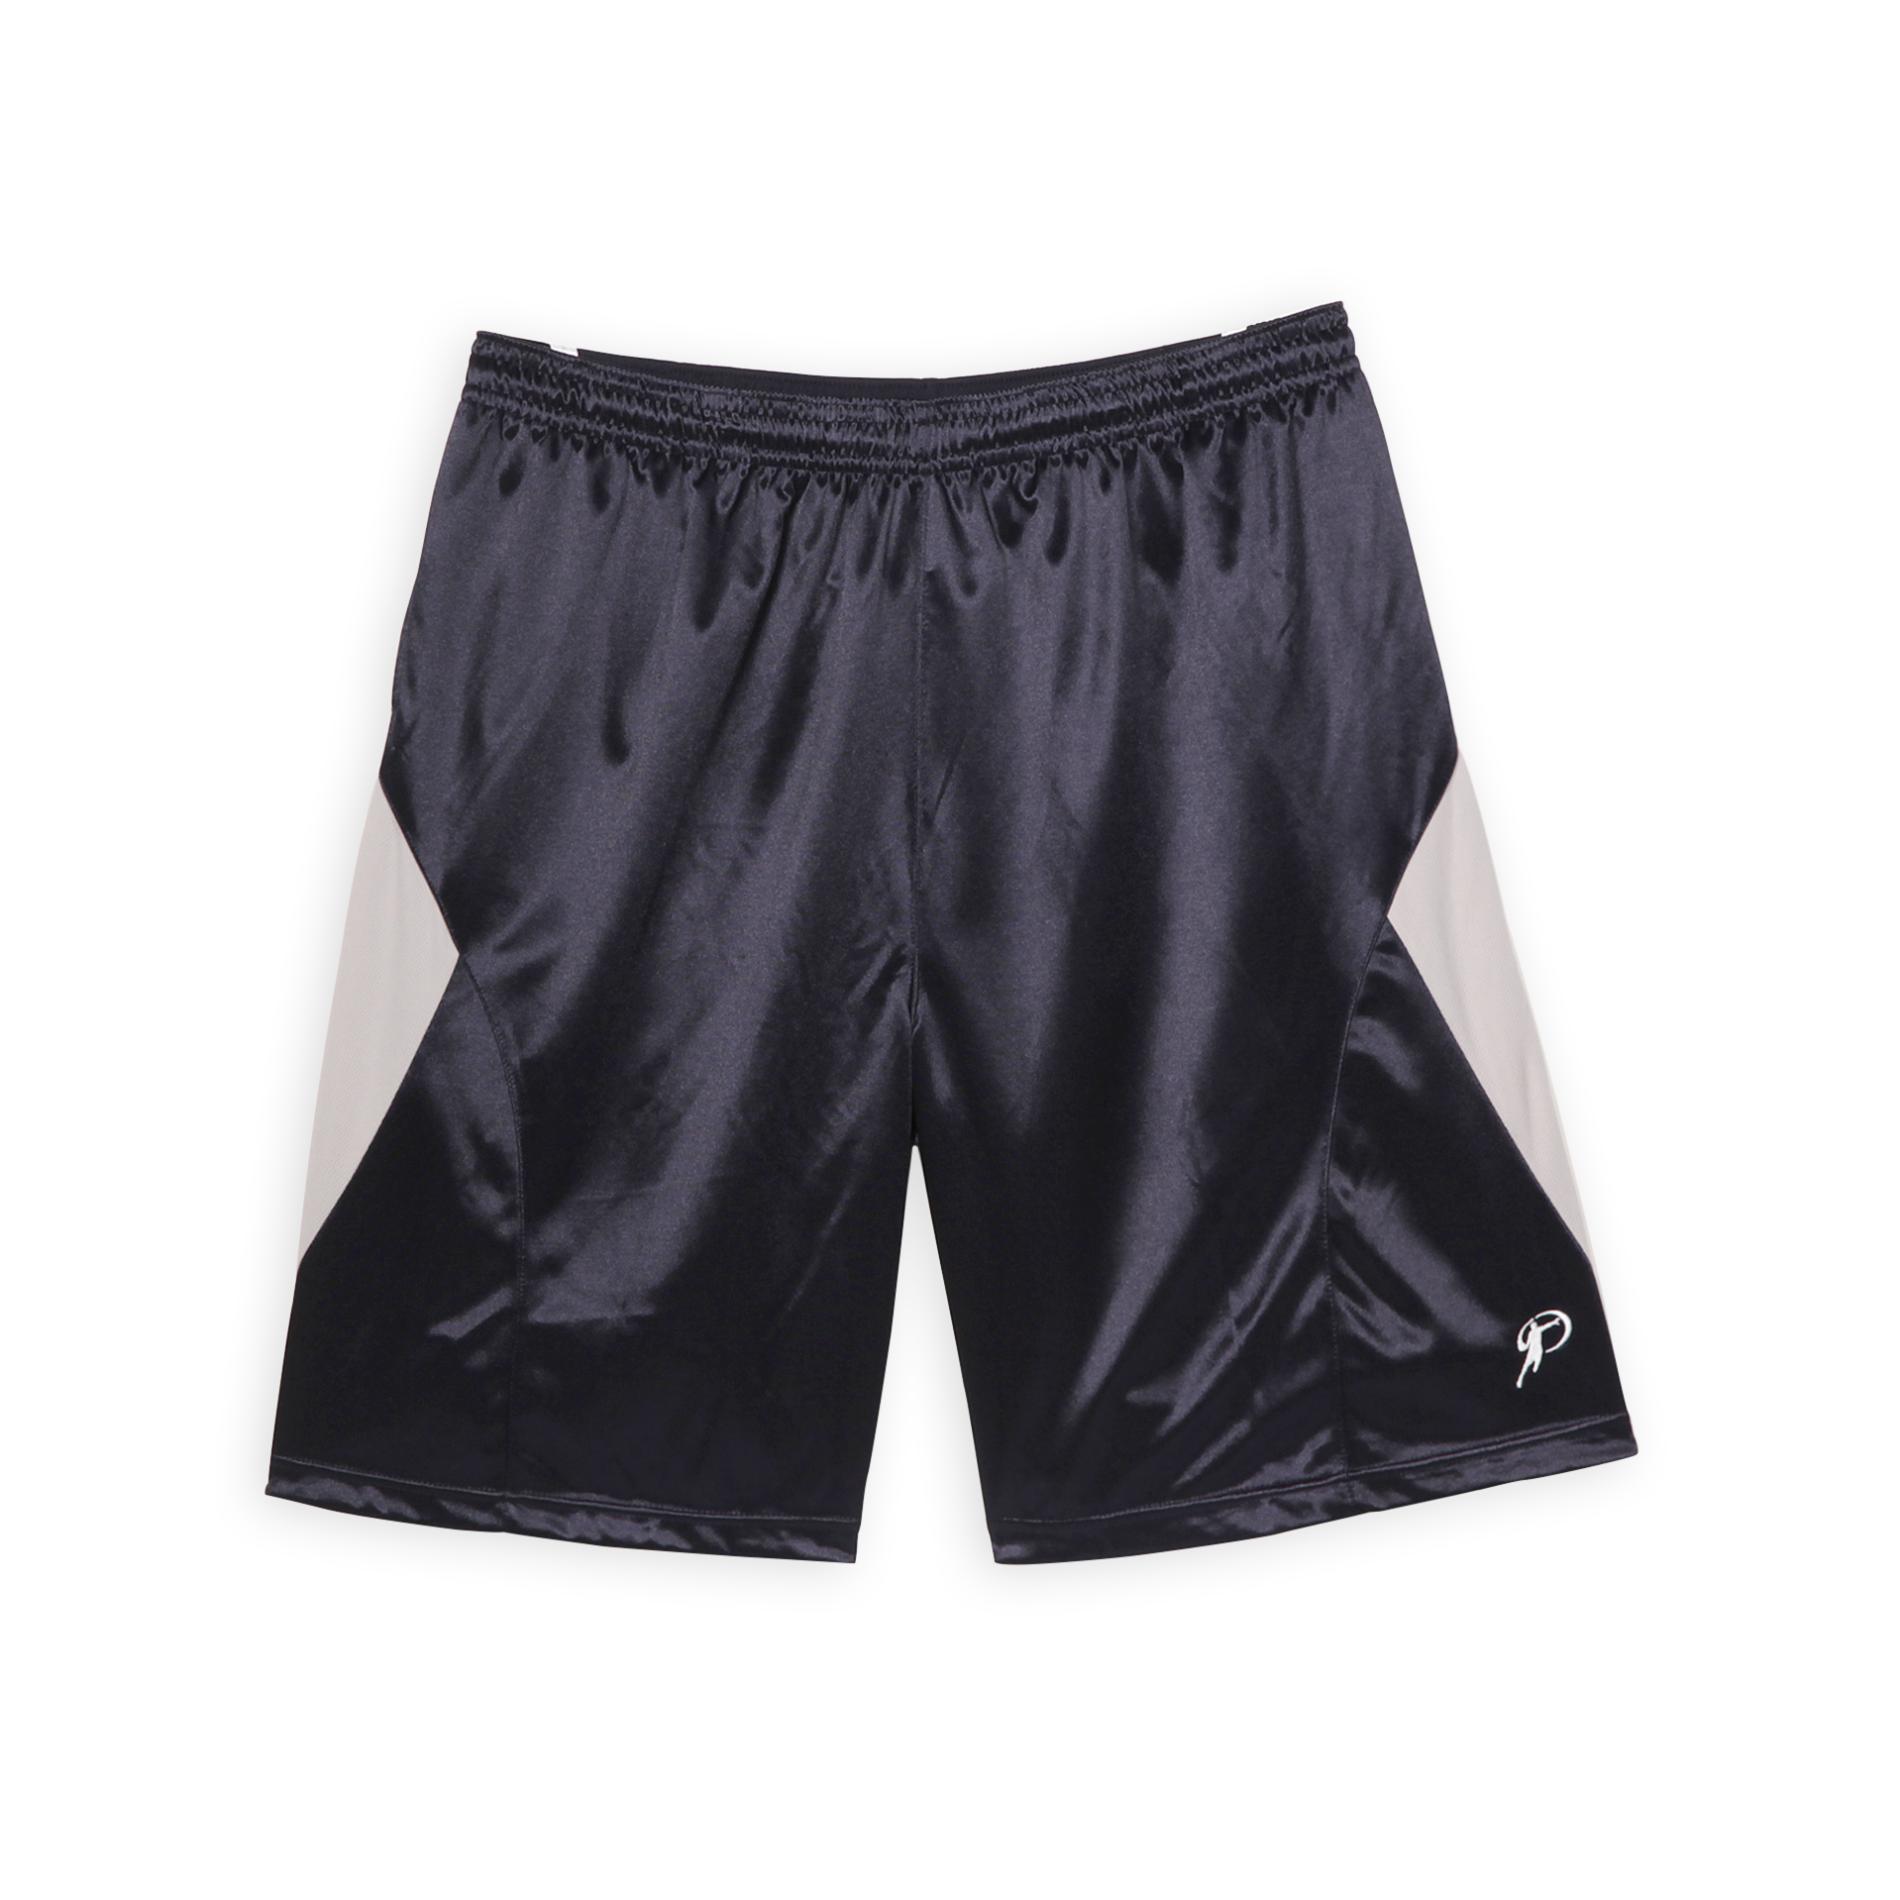 Protege Men's Big & Tall Pieced Basketball Shorts